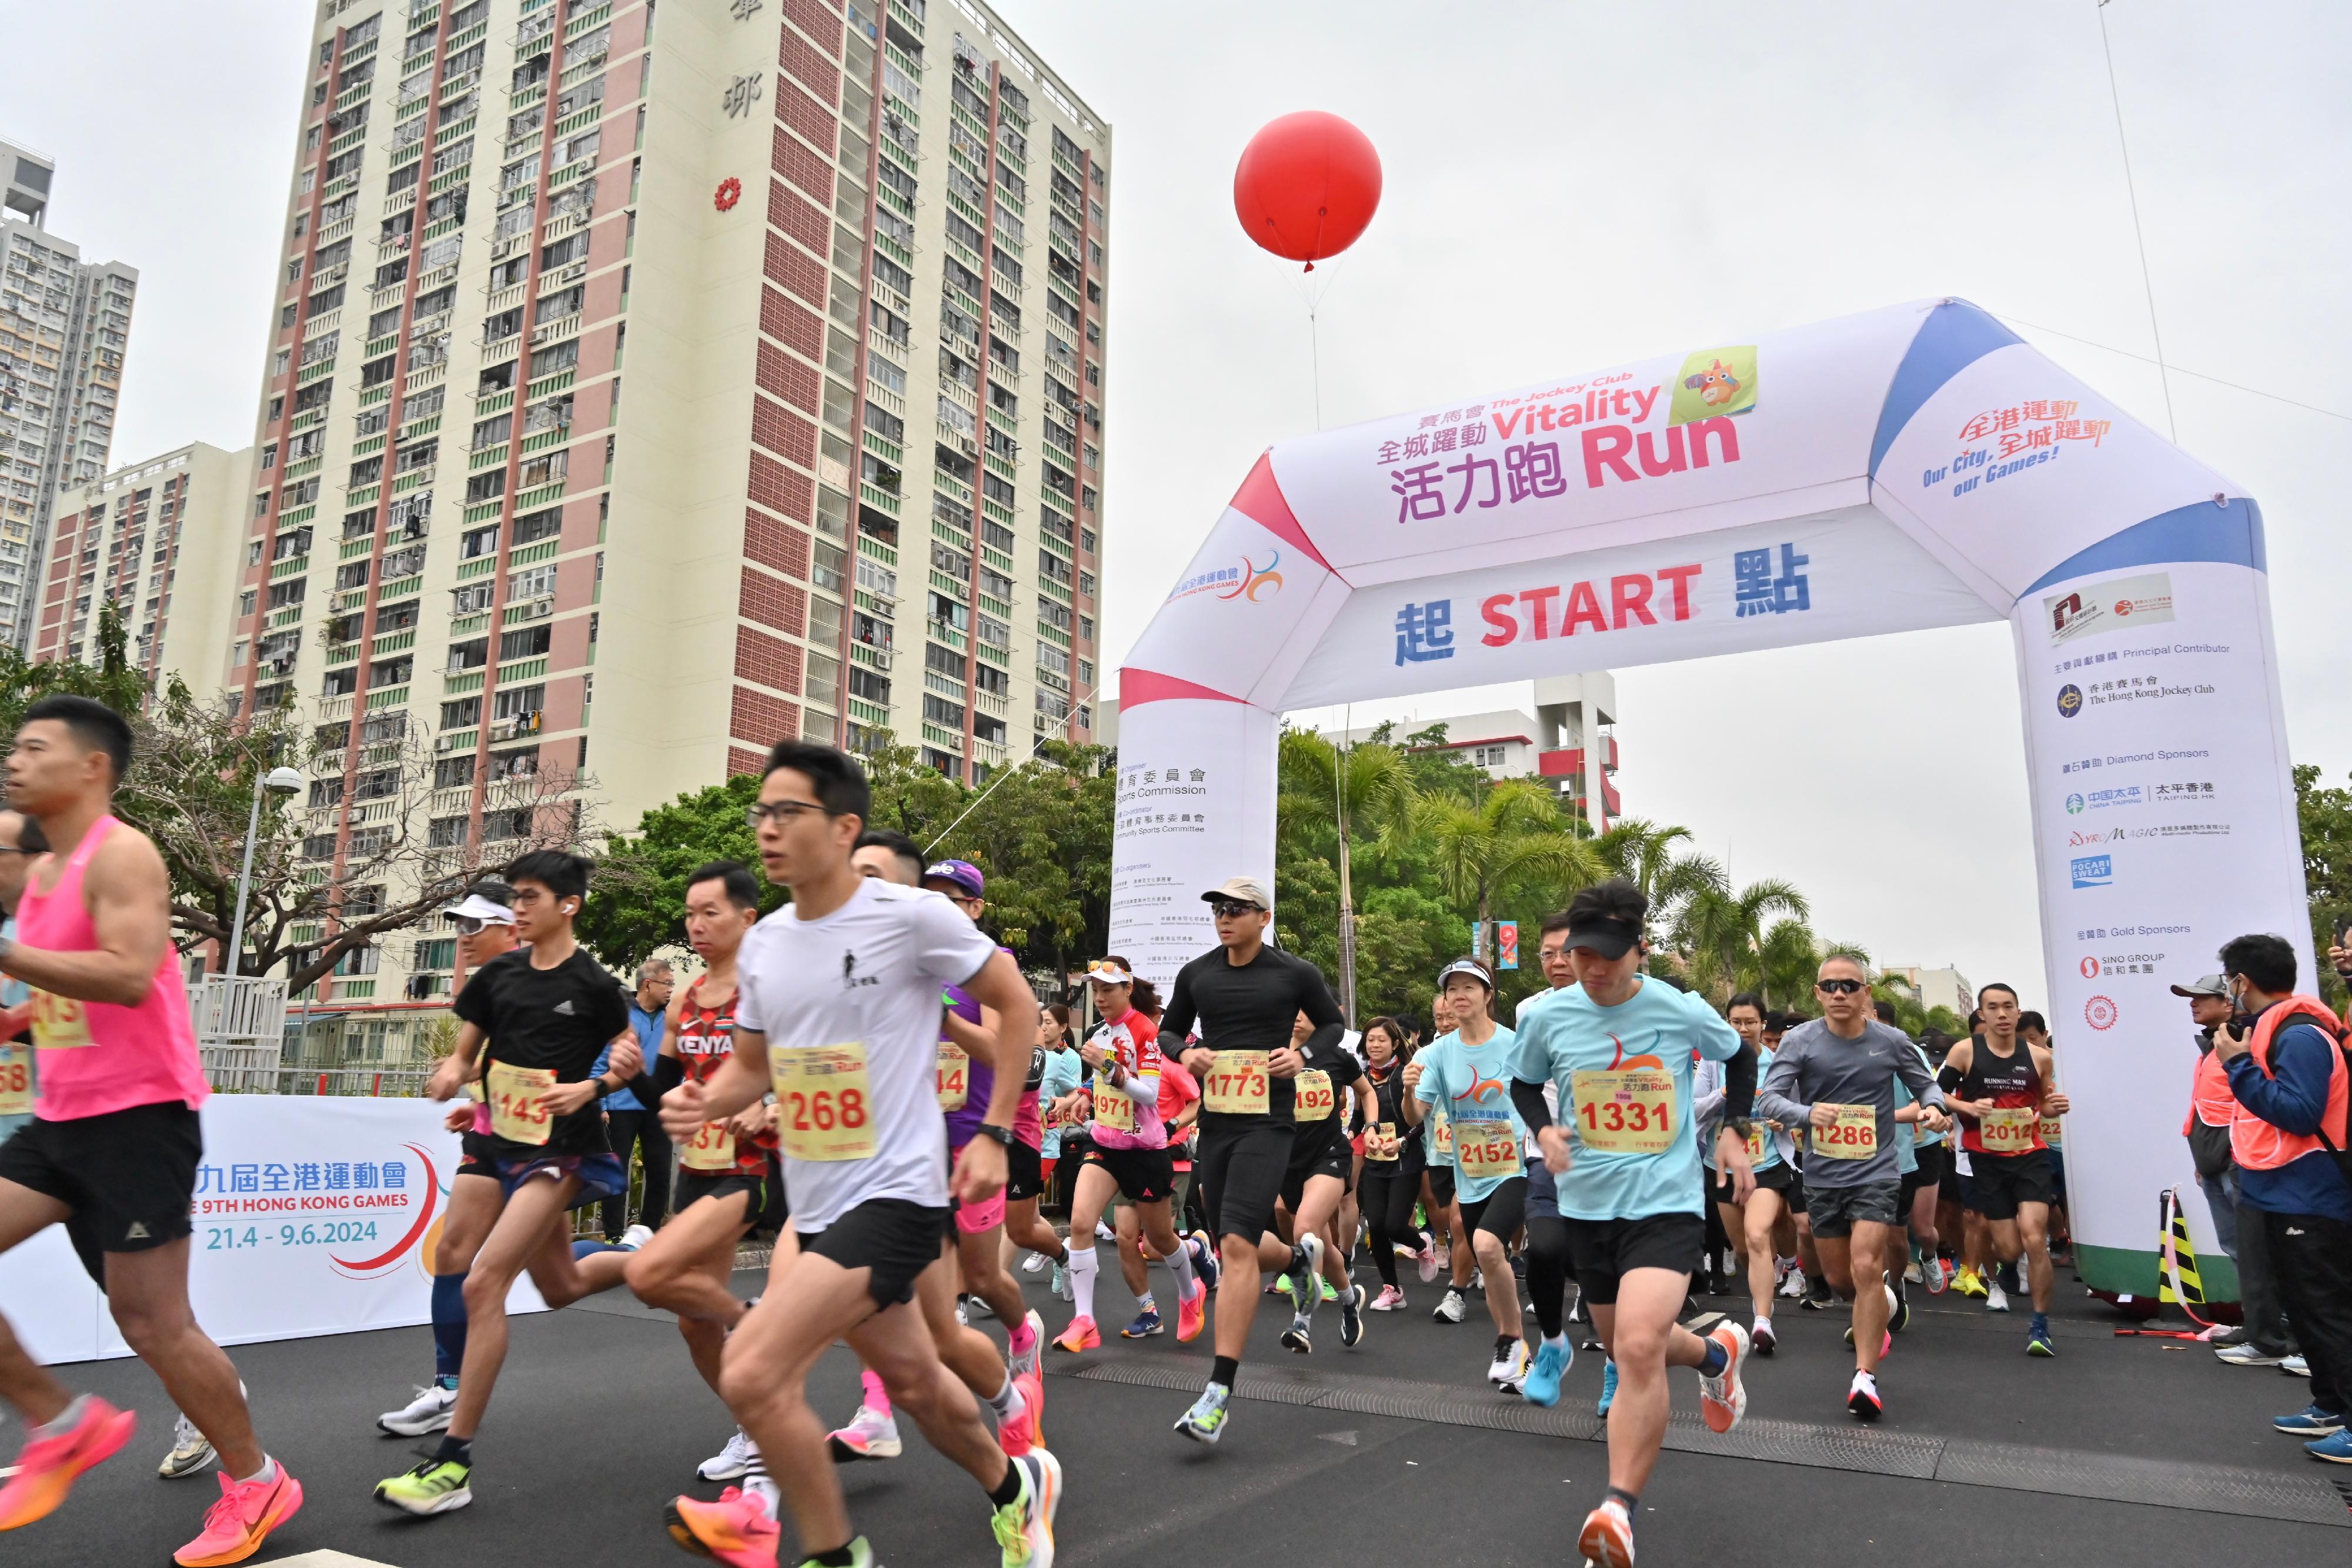 The 9th Hong Kong Games' Jockey Club Vitality Run was held alongside the Shing Mun River in Sha Tin this morning (March 3). More than 5 000 people took part in the event.